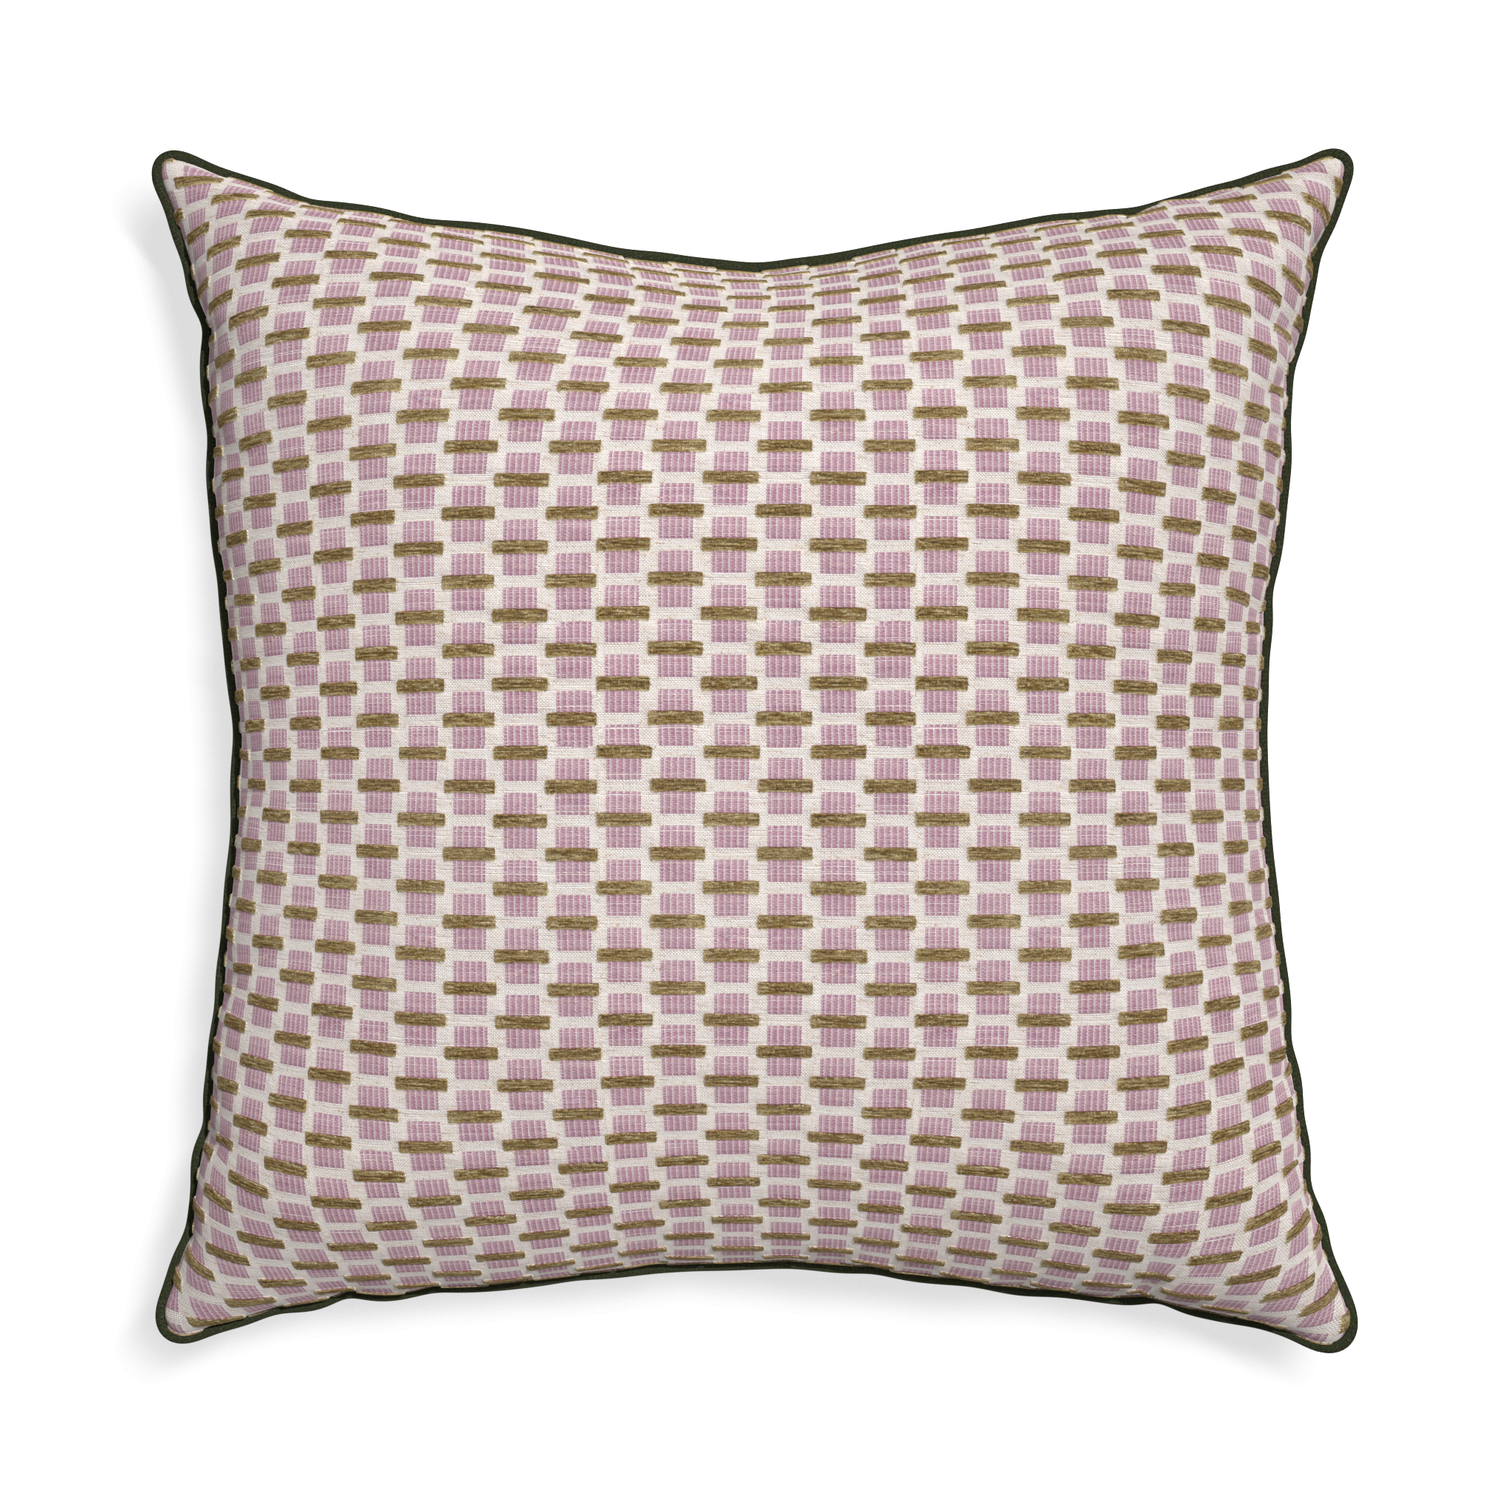 Euro-sham willow orchid custom pink geometric chenillepillow with f piping on white background